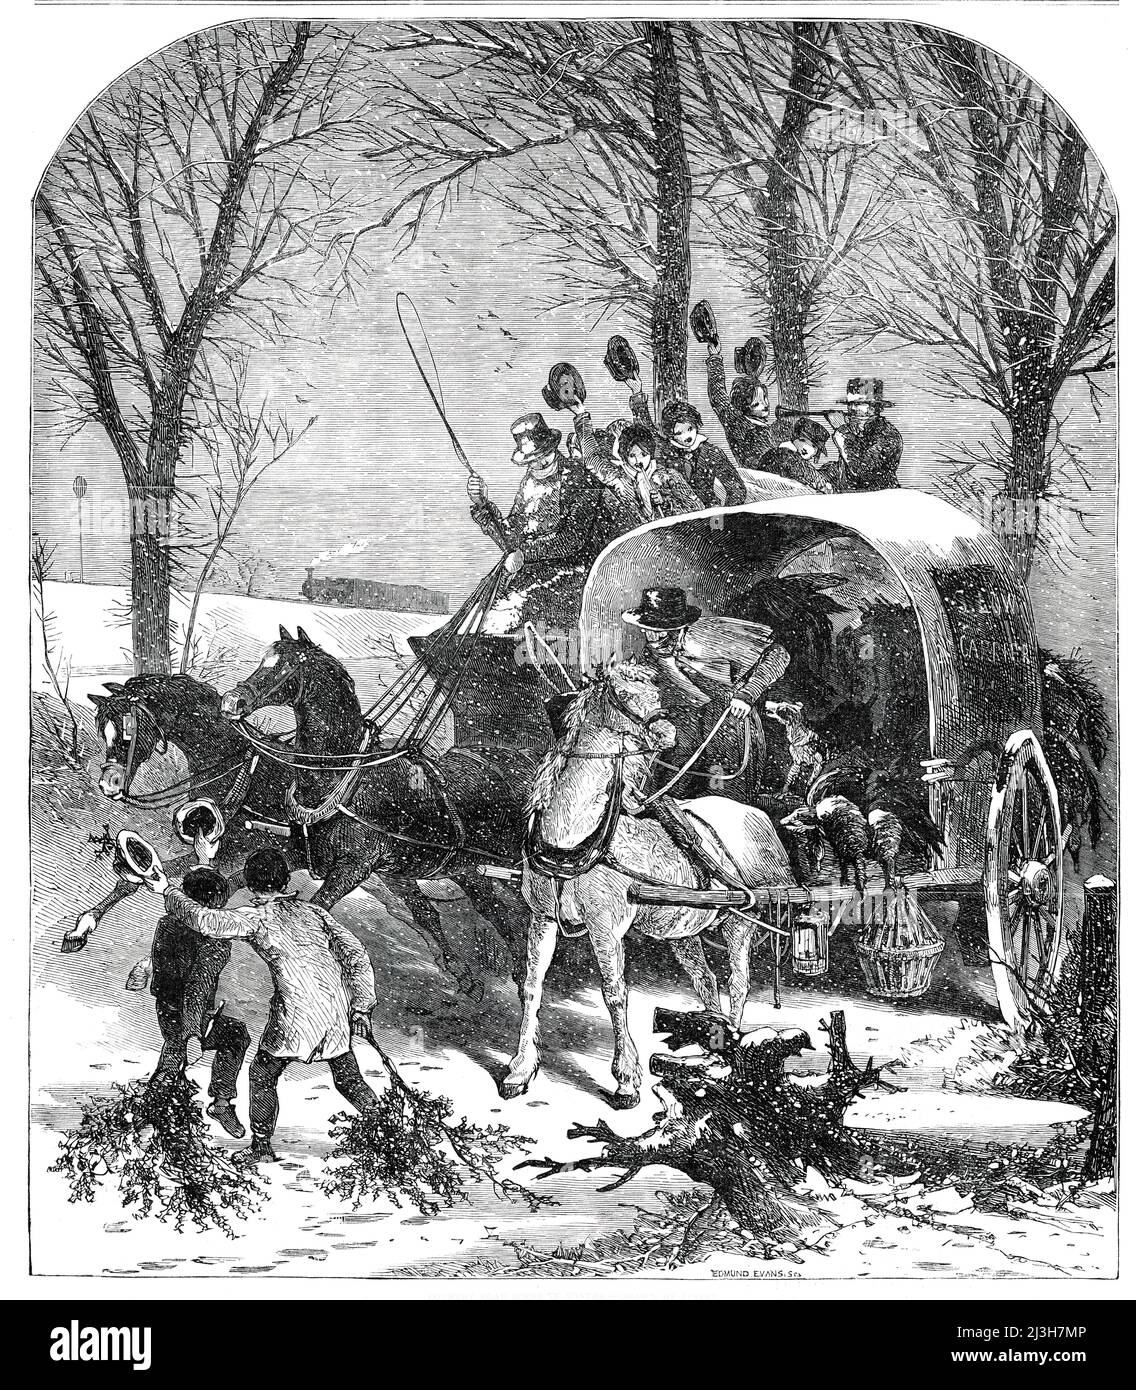 Country Road Scene in Winter - drawn by Foster, 1850. A carter pulls to one side for a stagecoach with schoolboys travelling home for the Christmas holidays. Illustration to a poem by H.: 'Less care they who crowd the roof - Happy schoolboys, overglad; To the weather Christmas-proof; Laughing, shouting, almost mad! Thoughts of home and merry times, Sing within their hearts, like chimes. Hears their shout, with answering joy, Carrier, looking from his cart; Once he was himself a boy, And is yet one in his heart. Willing, then, he turns aside - They may pass him in their pride'. From &quot;Illus Stock Photo